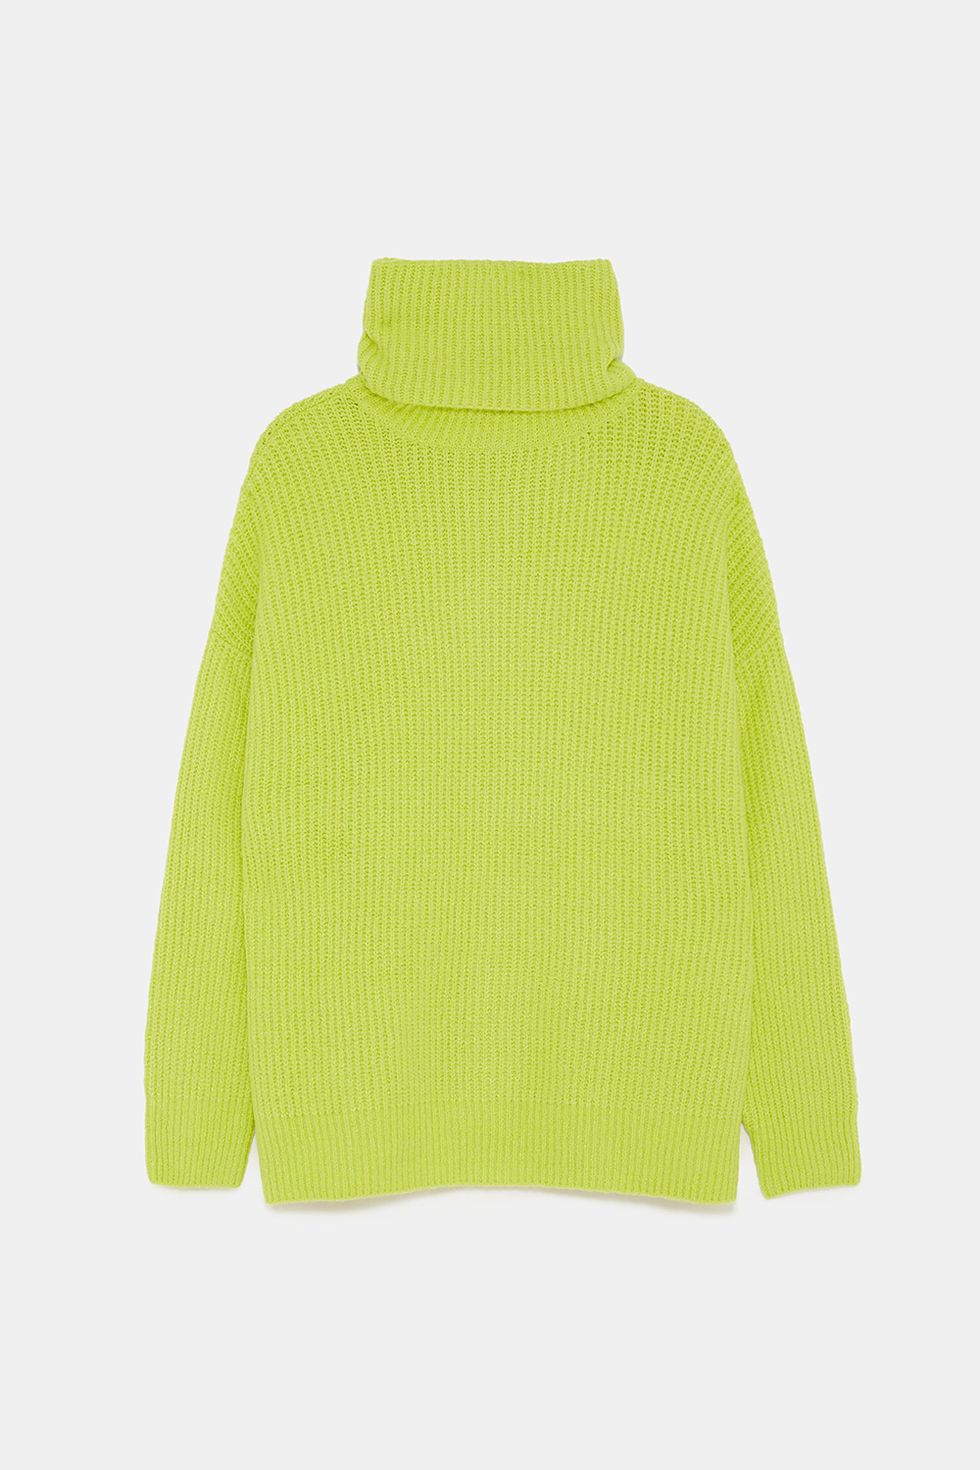 Clothing, Green, Hood, Outerwear, Sleeve, Yellow, Sweater, Neck, Jersey, Jacket, 